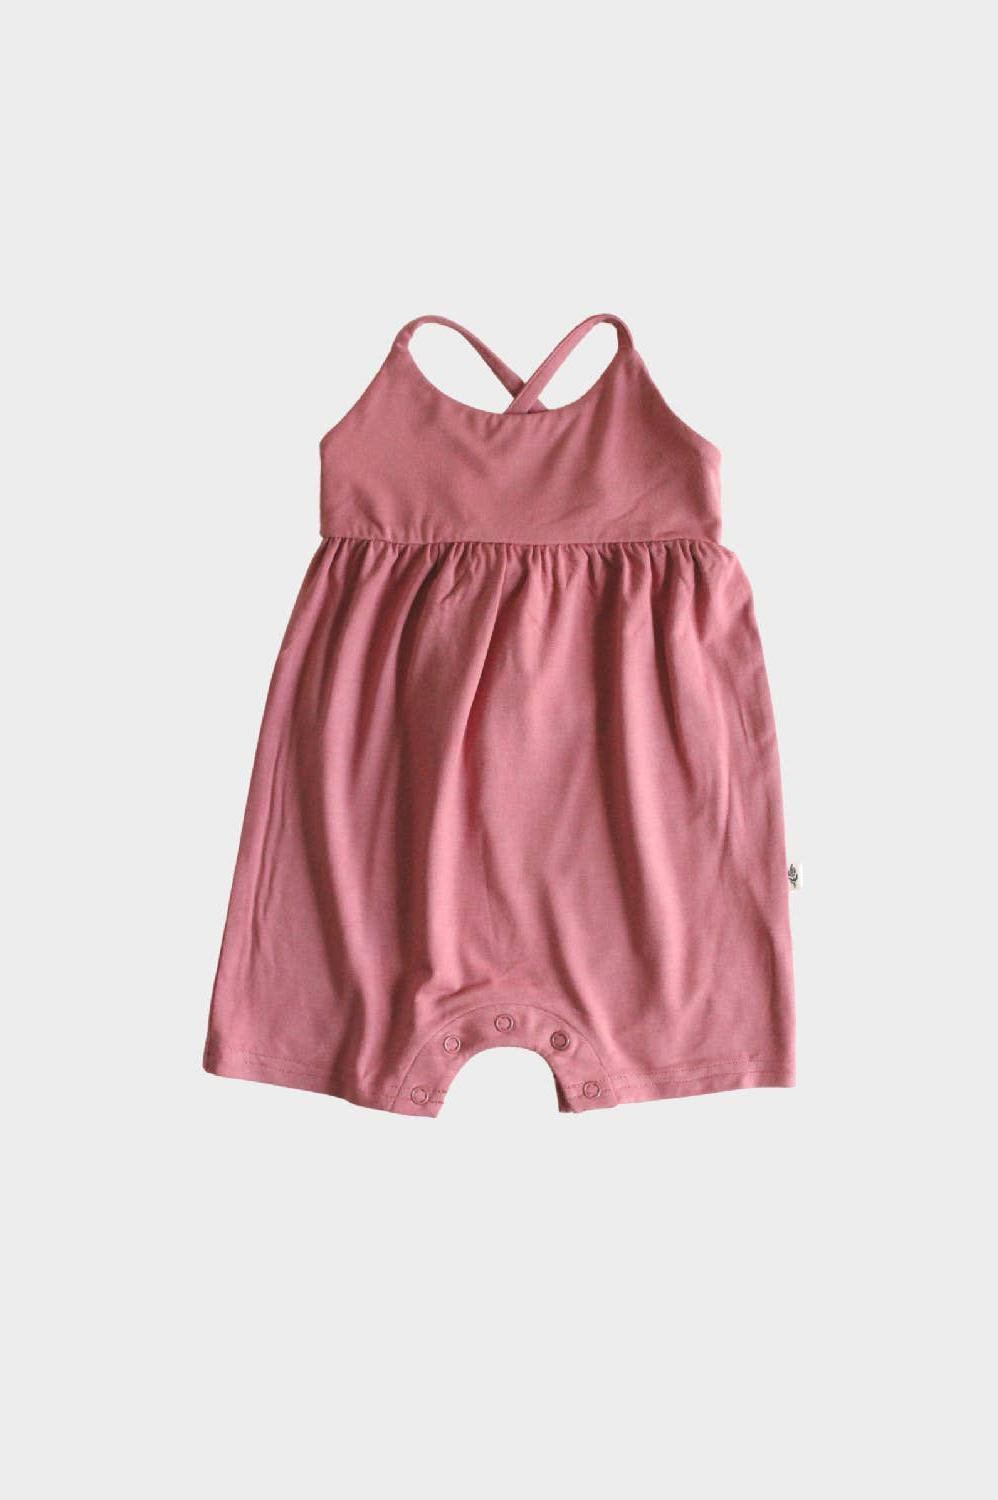 Jenn Tie Back Romper - Dusty Rose - Tea for Three: A Children's Boutique-New Arrivals-Tea for Three: A Children's Boutique